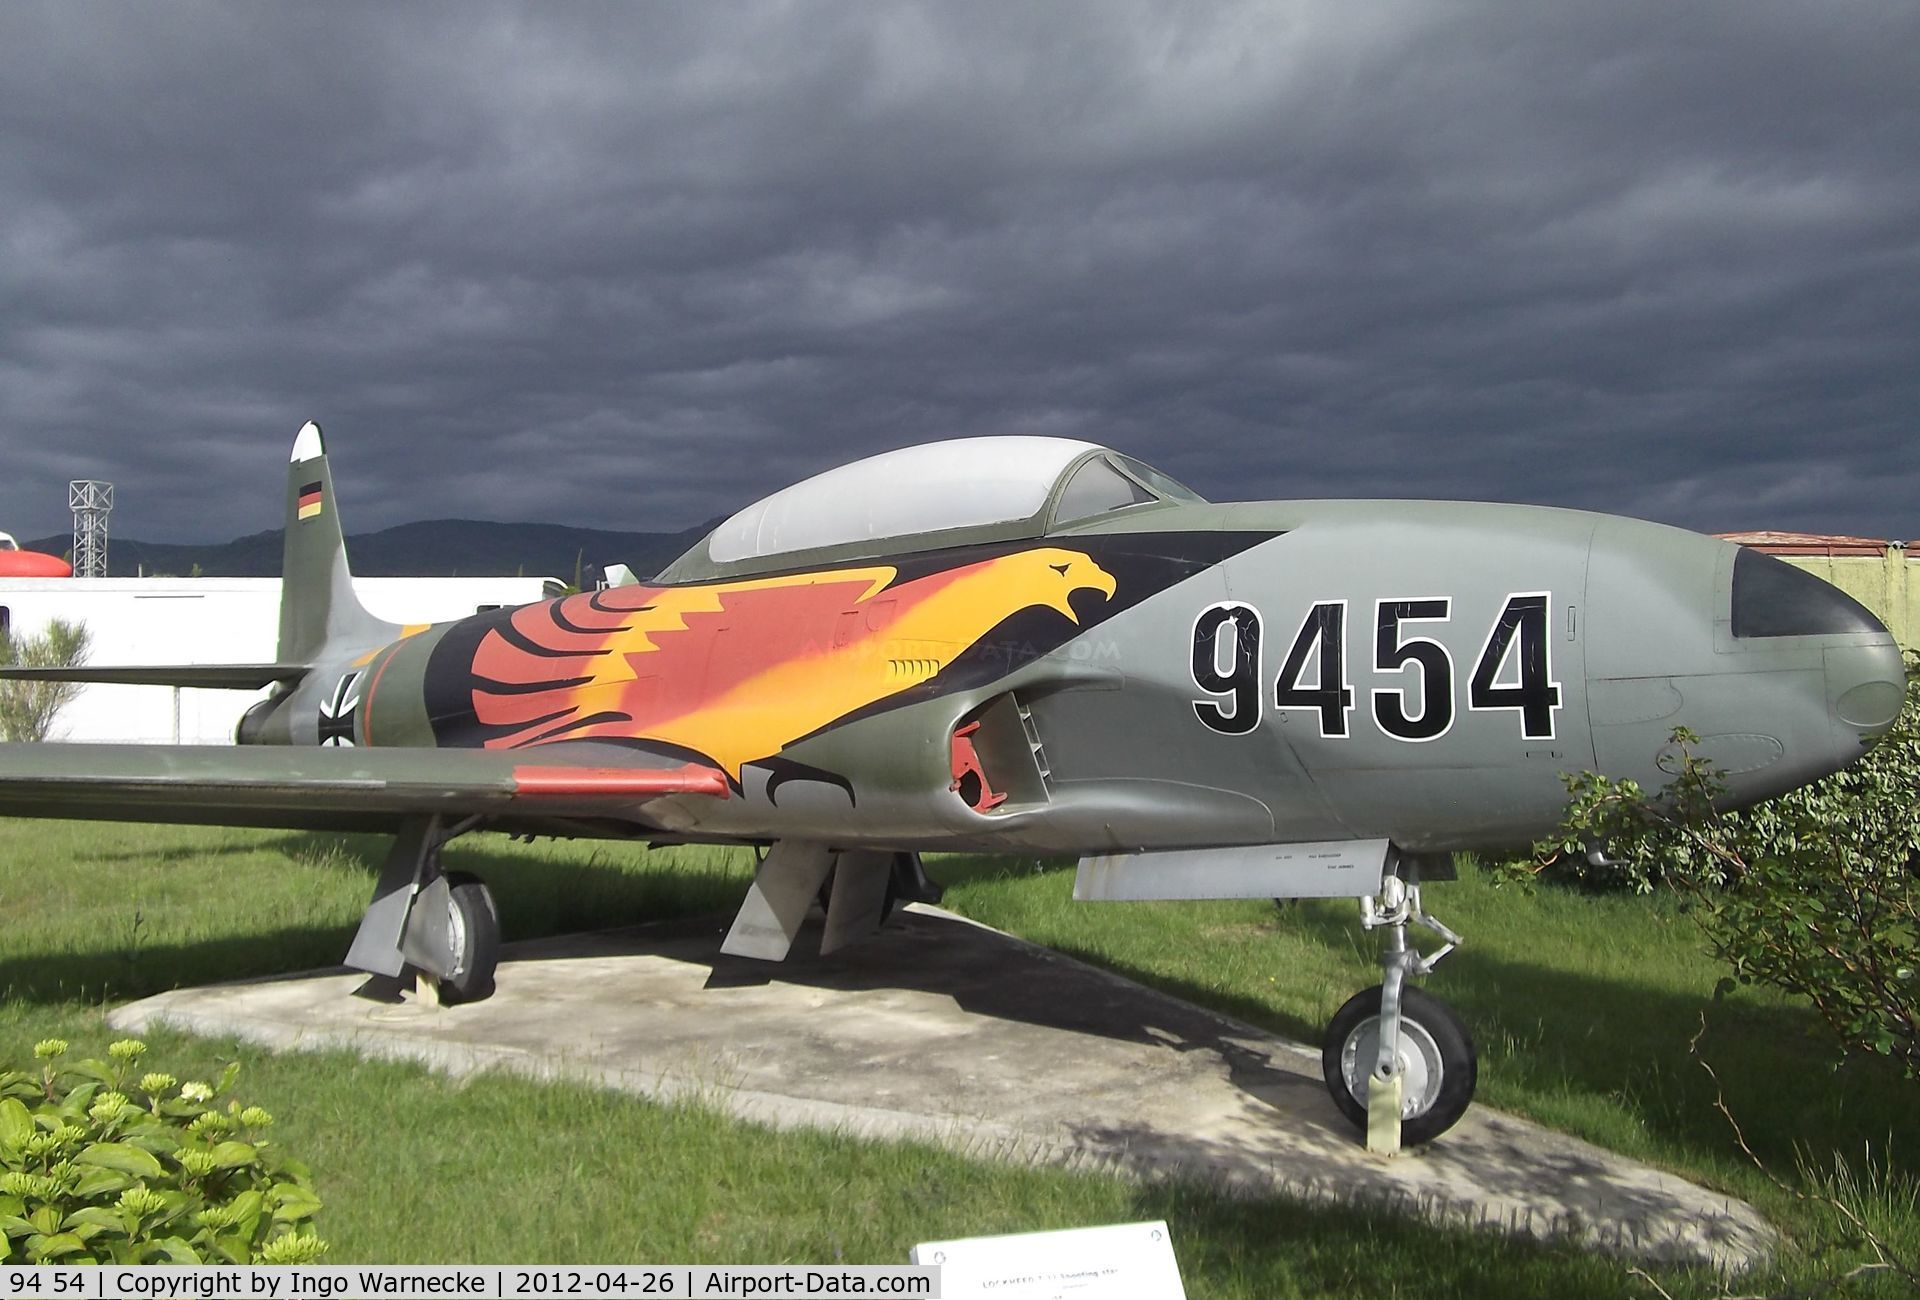 94 54, 1953 Lockheed T-33A Shooting Star C/N 580-9117, Lockheed T-33A at the Musée Européen de l'Aviation de Chasse, Montelimar Ancone airfield